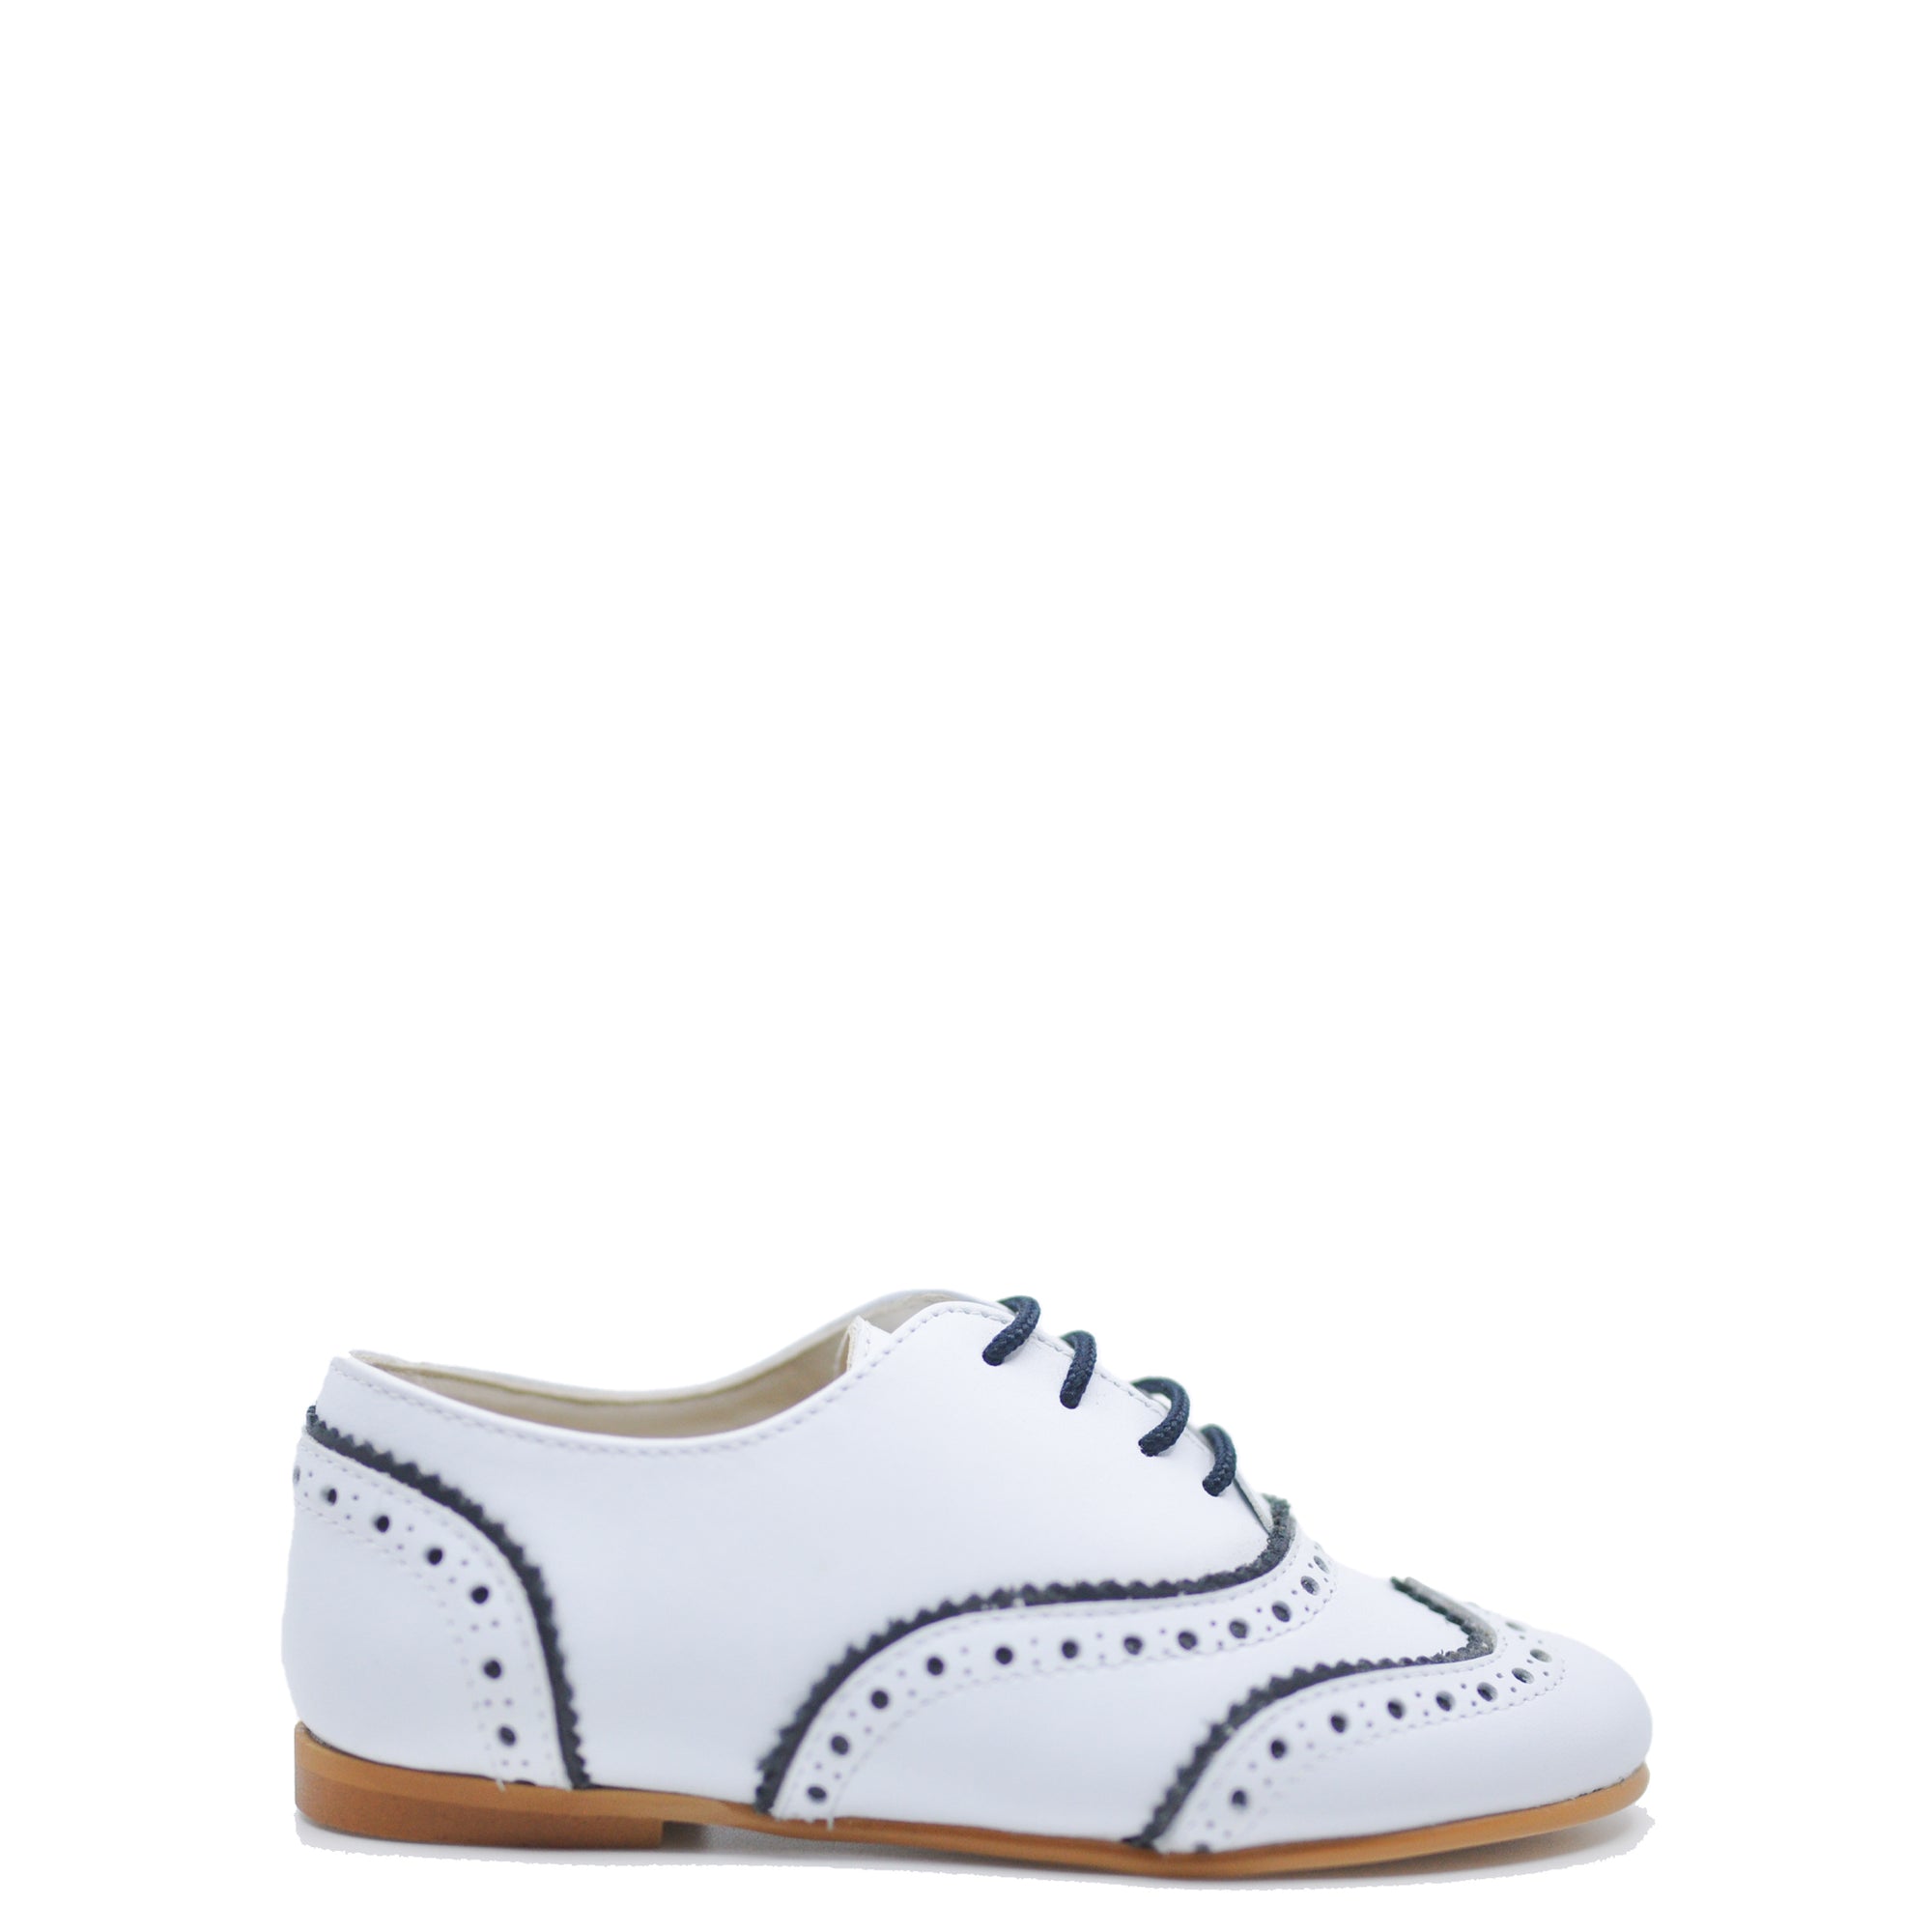 Sonatina White and Navy Wingtip Oxford-Tassel Children Shoes